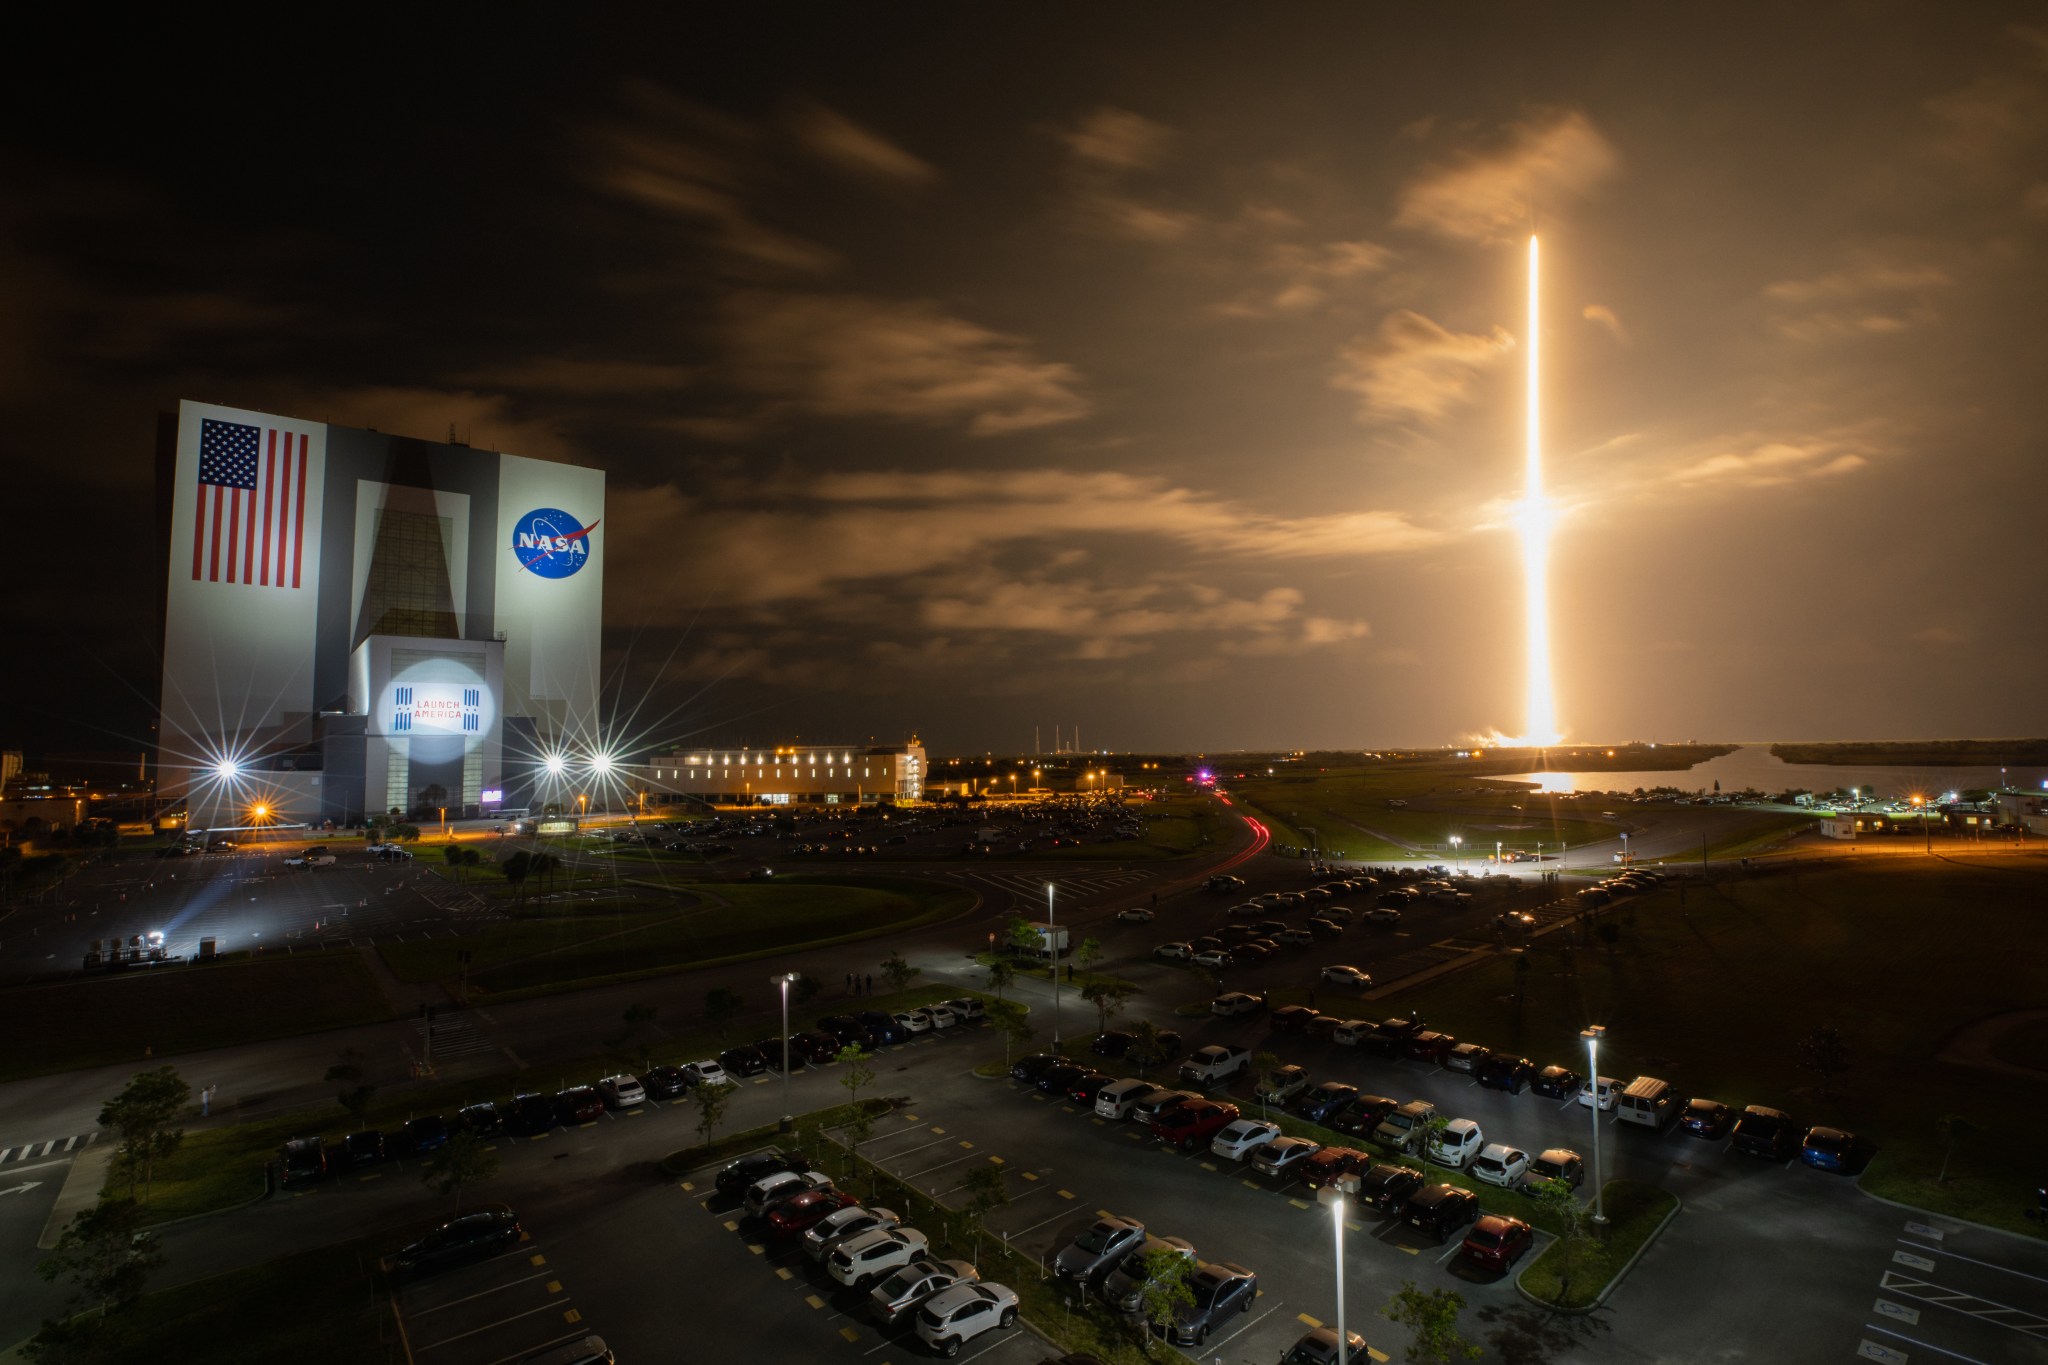 With a view of the iconic Vehicle Assembly Building at left, a SpaceX Falcon 9 rocket soars upward from Launch Complex 39A at NASA’s Kennedy Space Center in Florida.